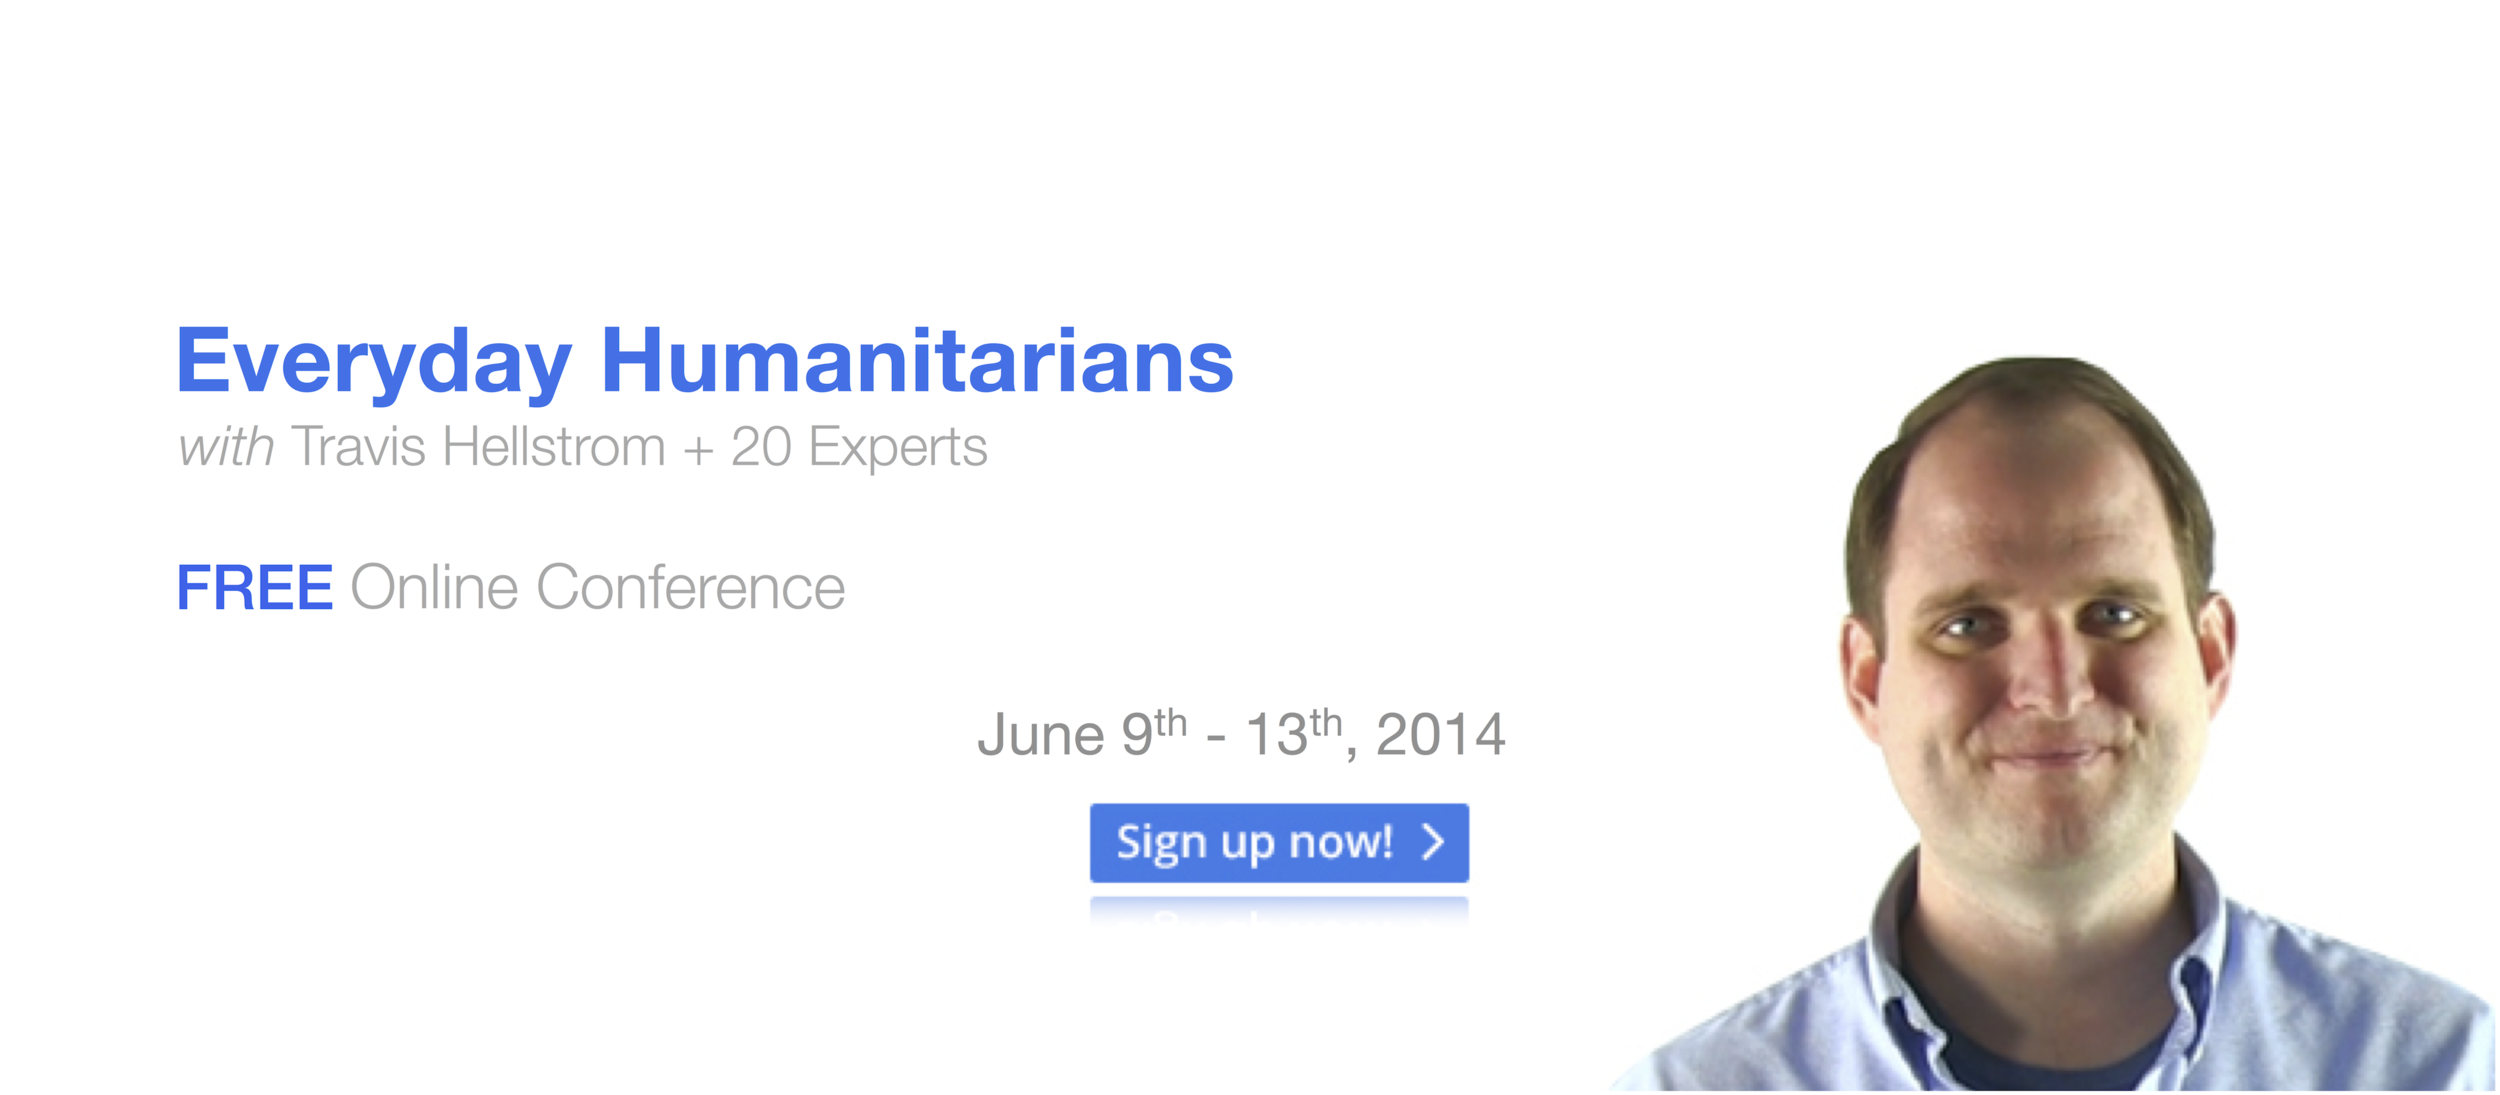 Humanitarian Conference Facebook Cover Photo